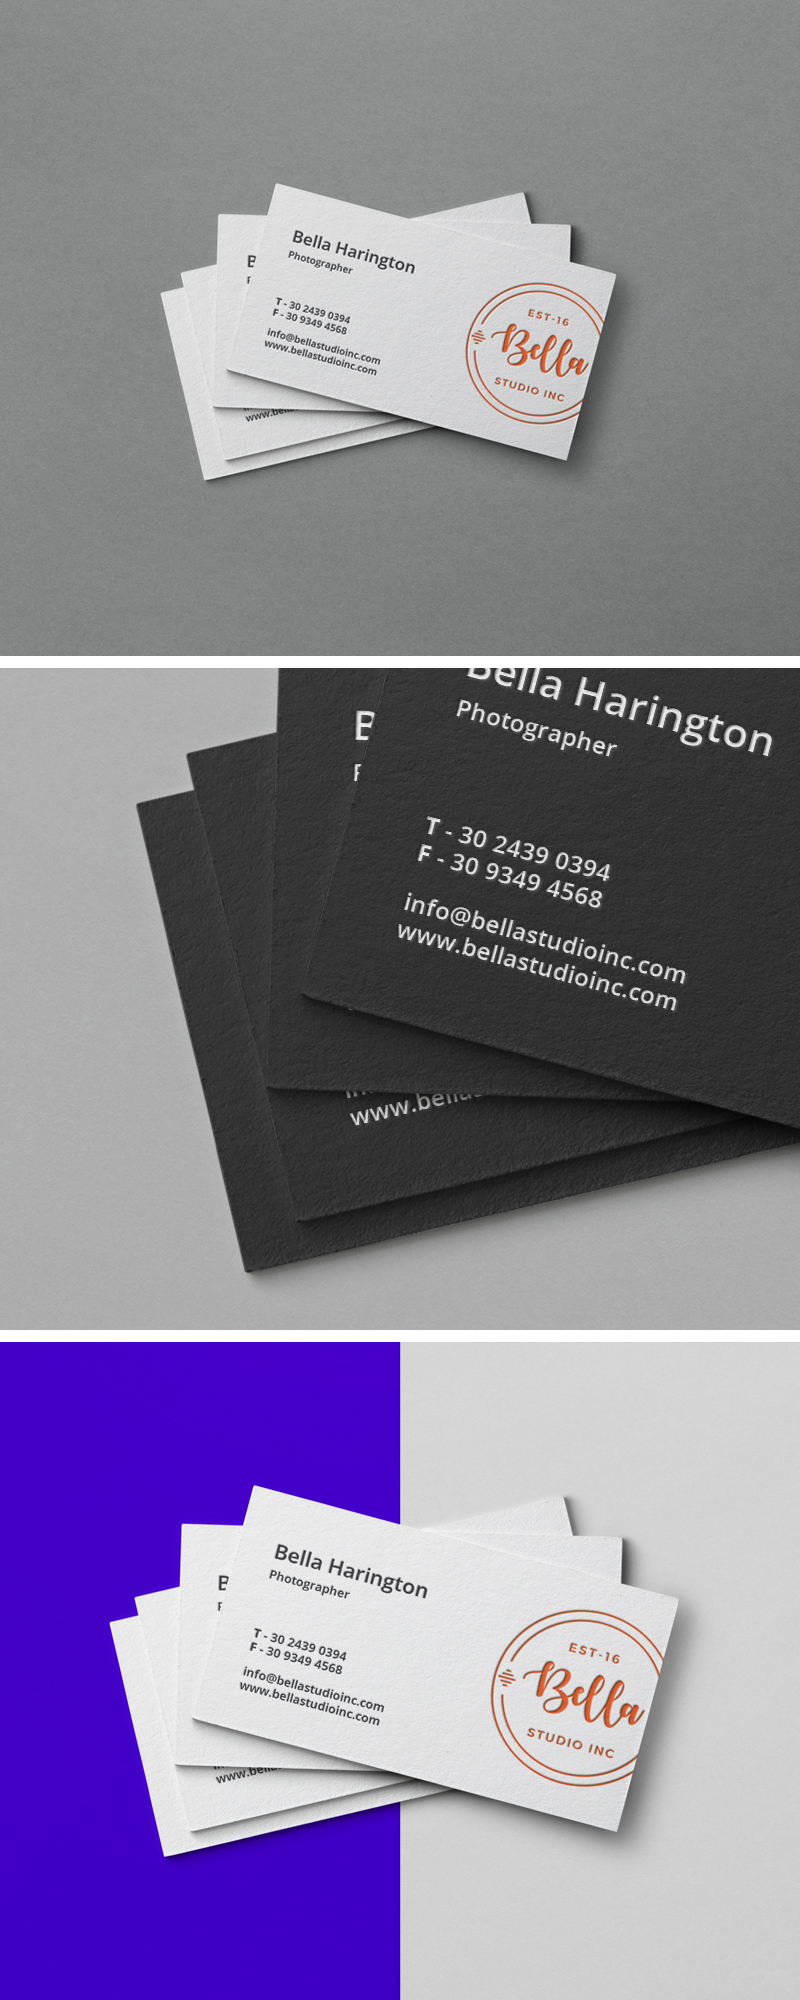 Download realistic business card psd mockup #5 free | Graphicsegg